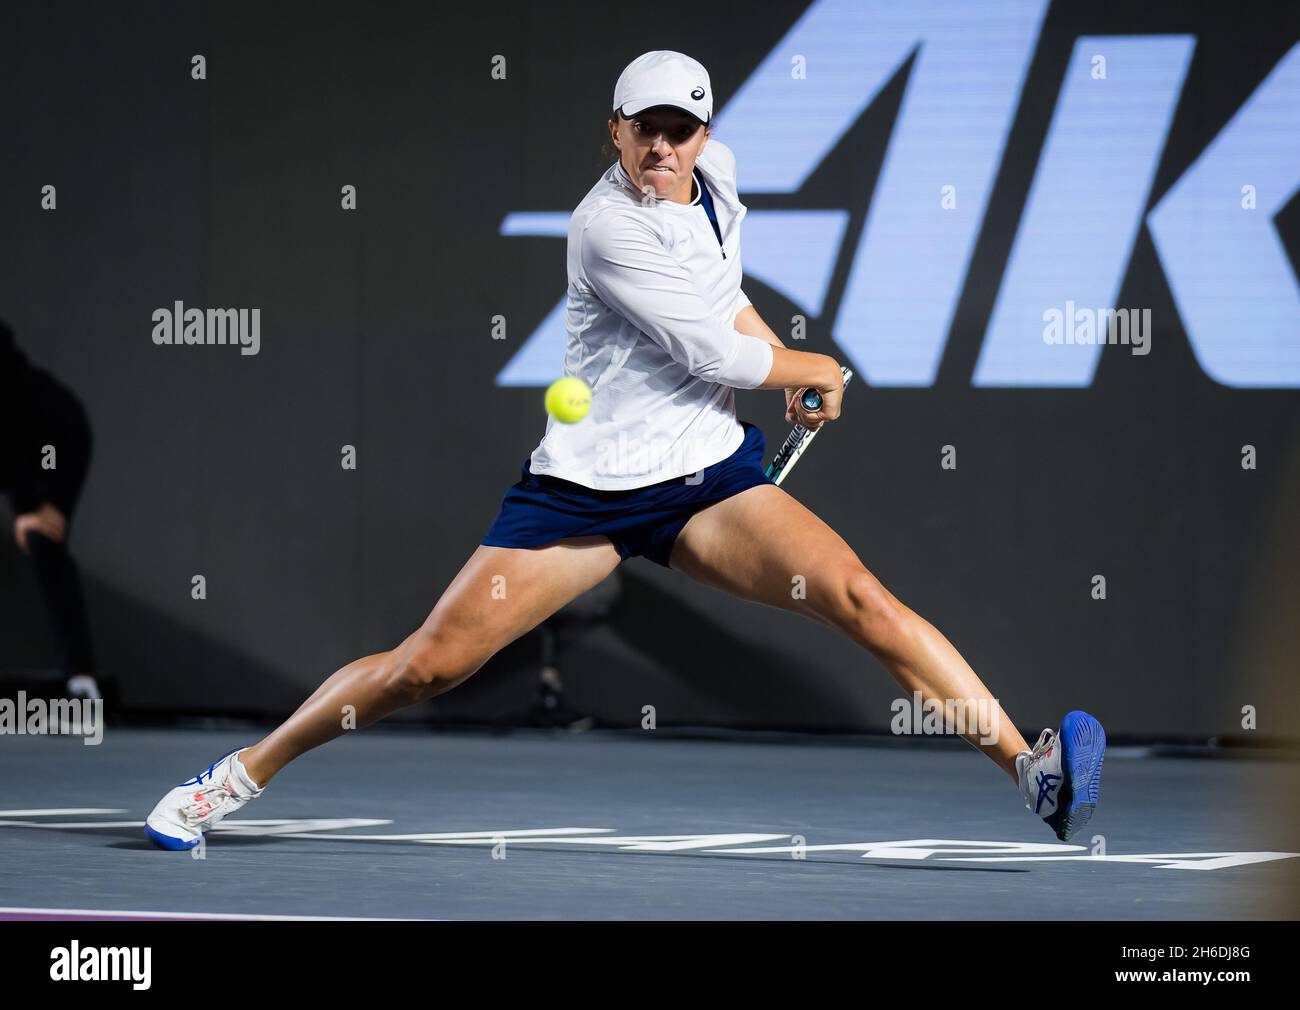 Iga Swiatek of Poland in action against Aryna Sabalenka of Belarus during  the second round robin match at the 2021 Akron WTA Finals Guadalajara,  Masters WTA tennis tournament on November 13, 2021